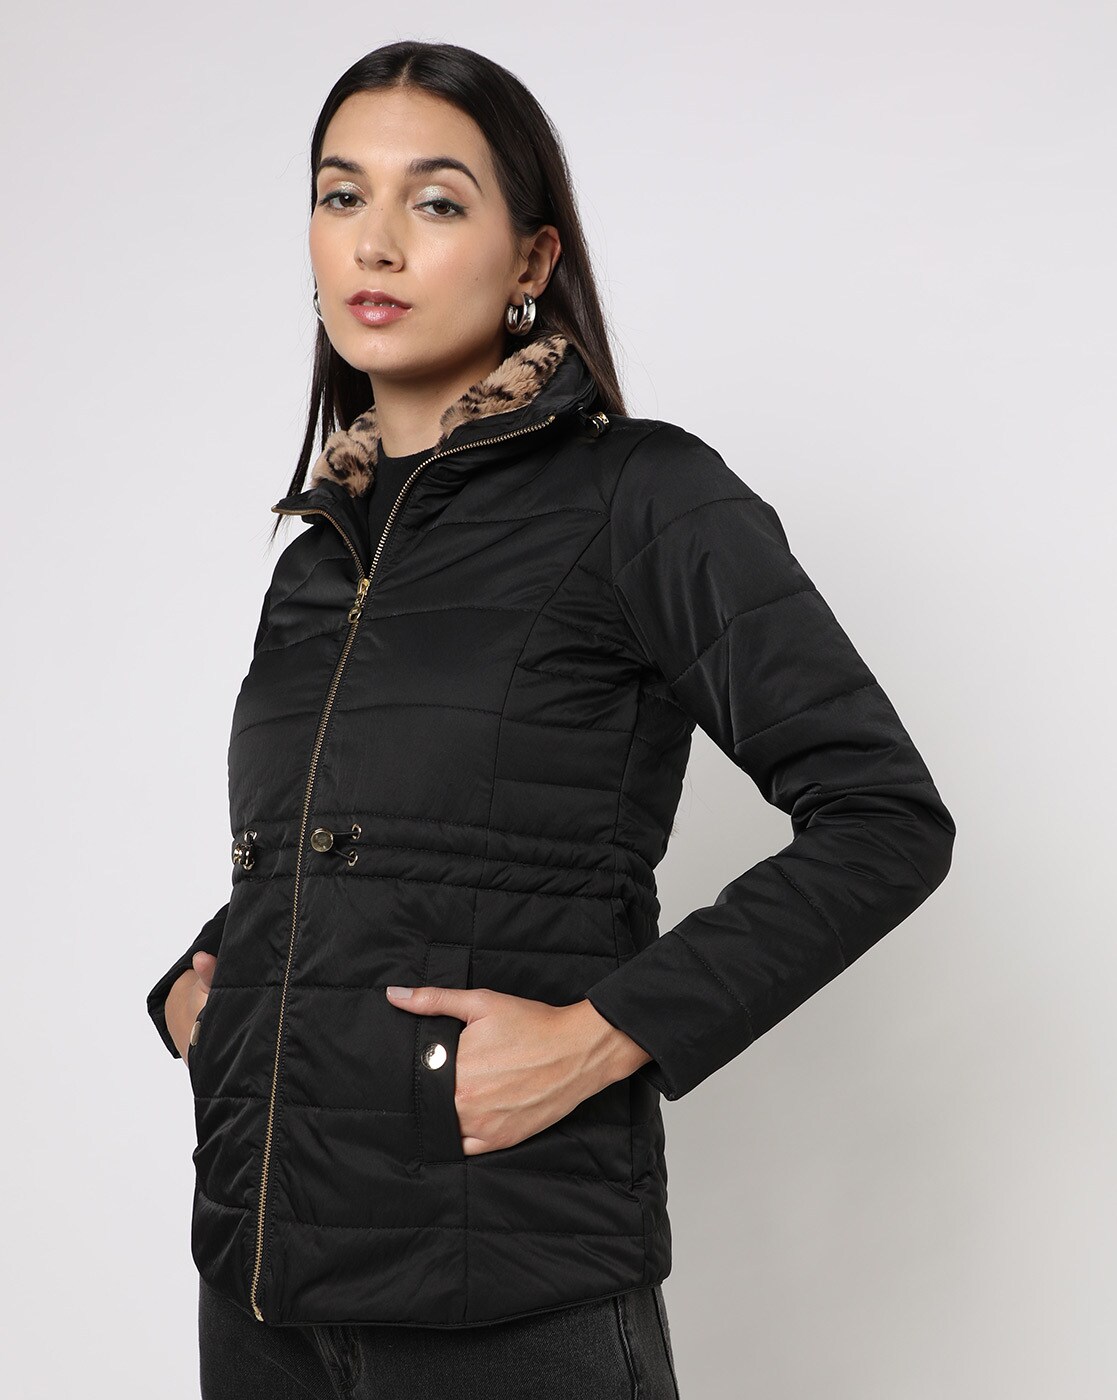 Cathalem Adult Shirt Female Coats Tail Coats Women Quilted Knee Puff Jacket  Lightweight Padded Jacket with Pockets Womens Coats Winter (Black, L)